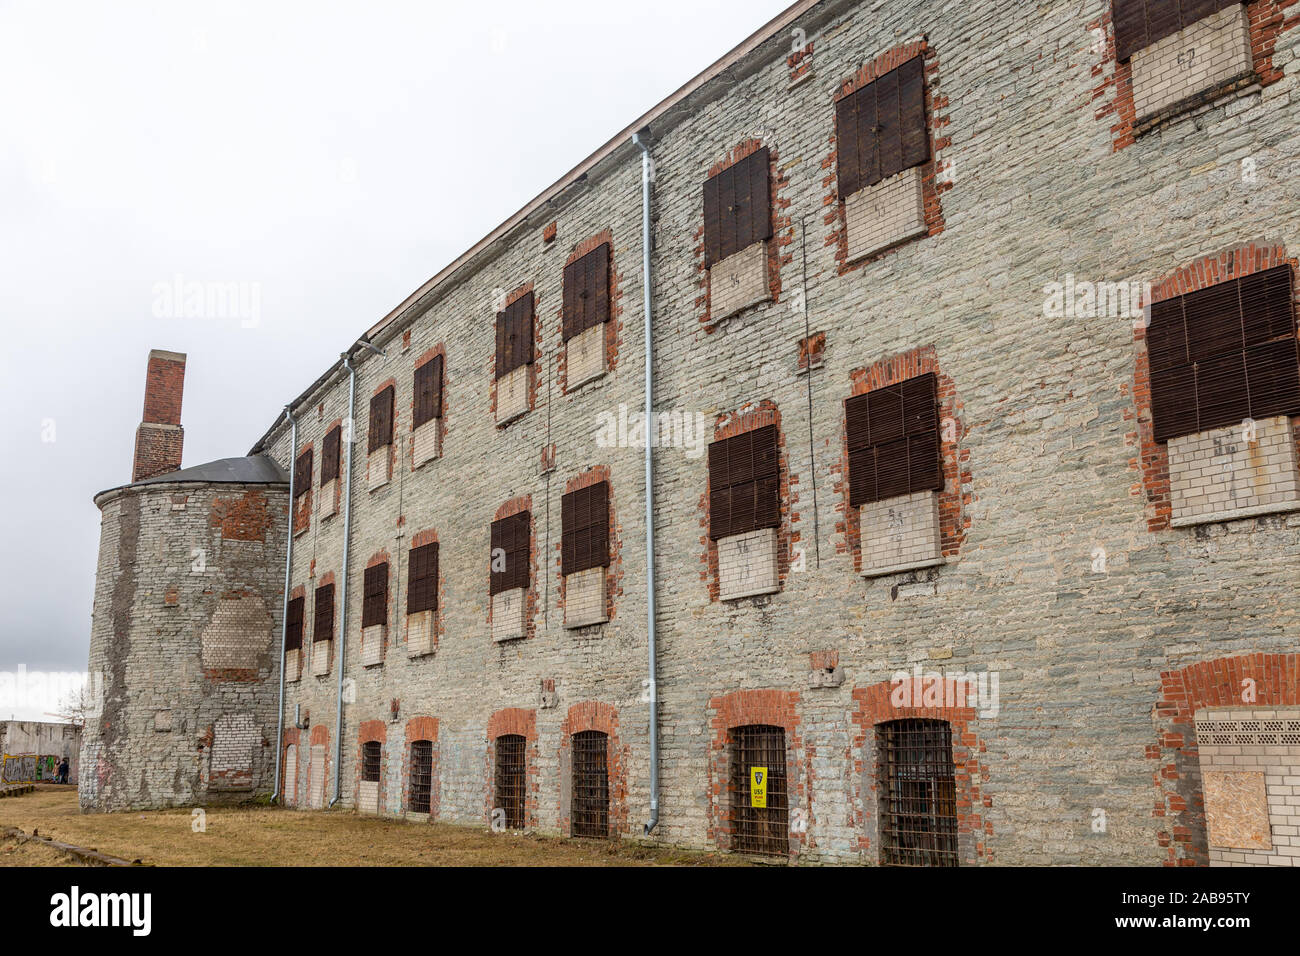 The seaward face of the fortress/prison Stock Photo